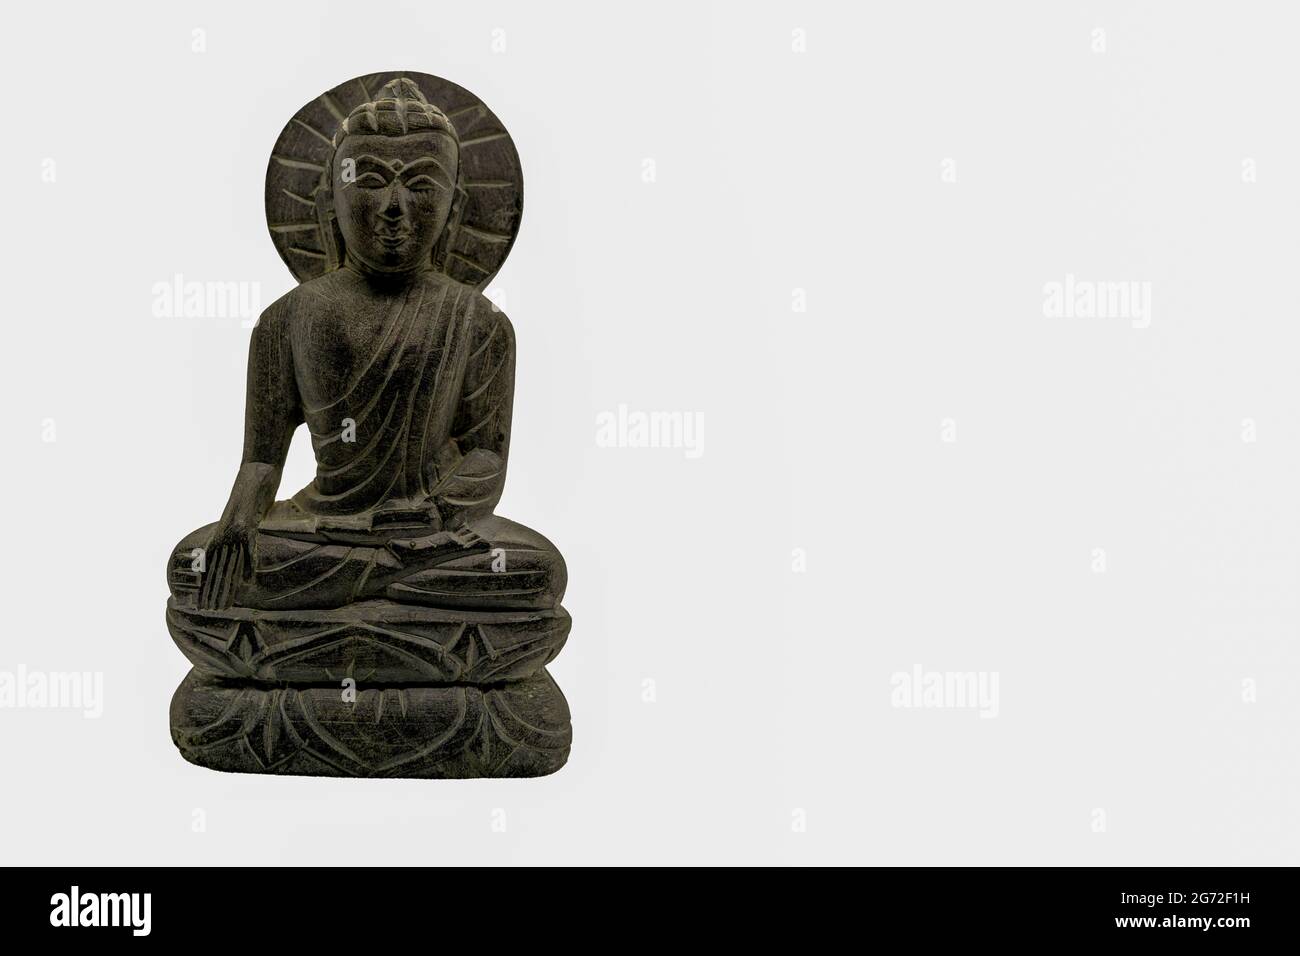 Little Buddha Pray or Meditate on Wooden Background with Empty Space.  Praying and Meditation, Yoga Concept Stock Image - Image of american,  krishna: 71202689